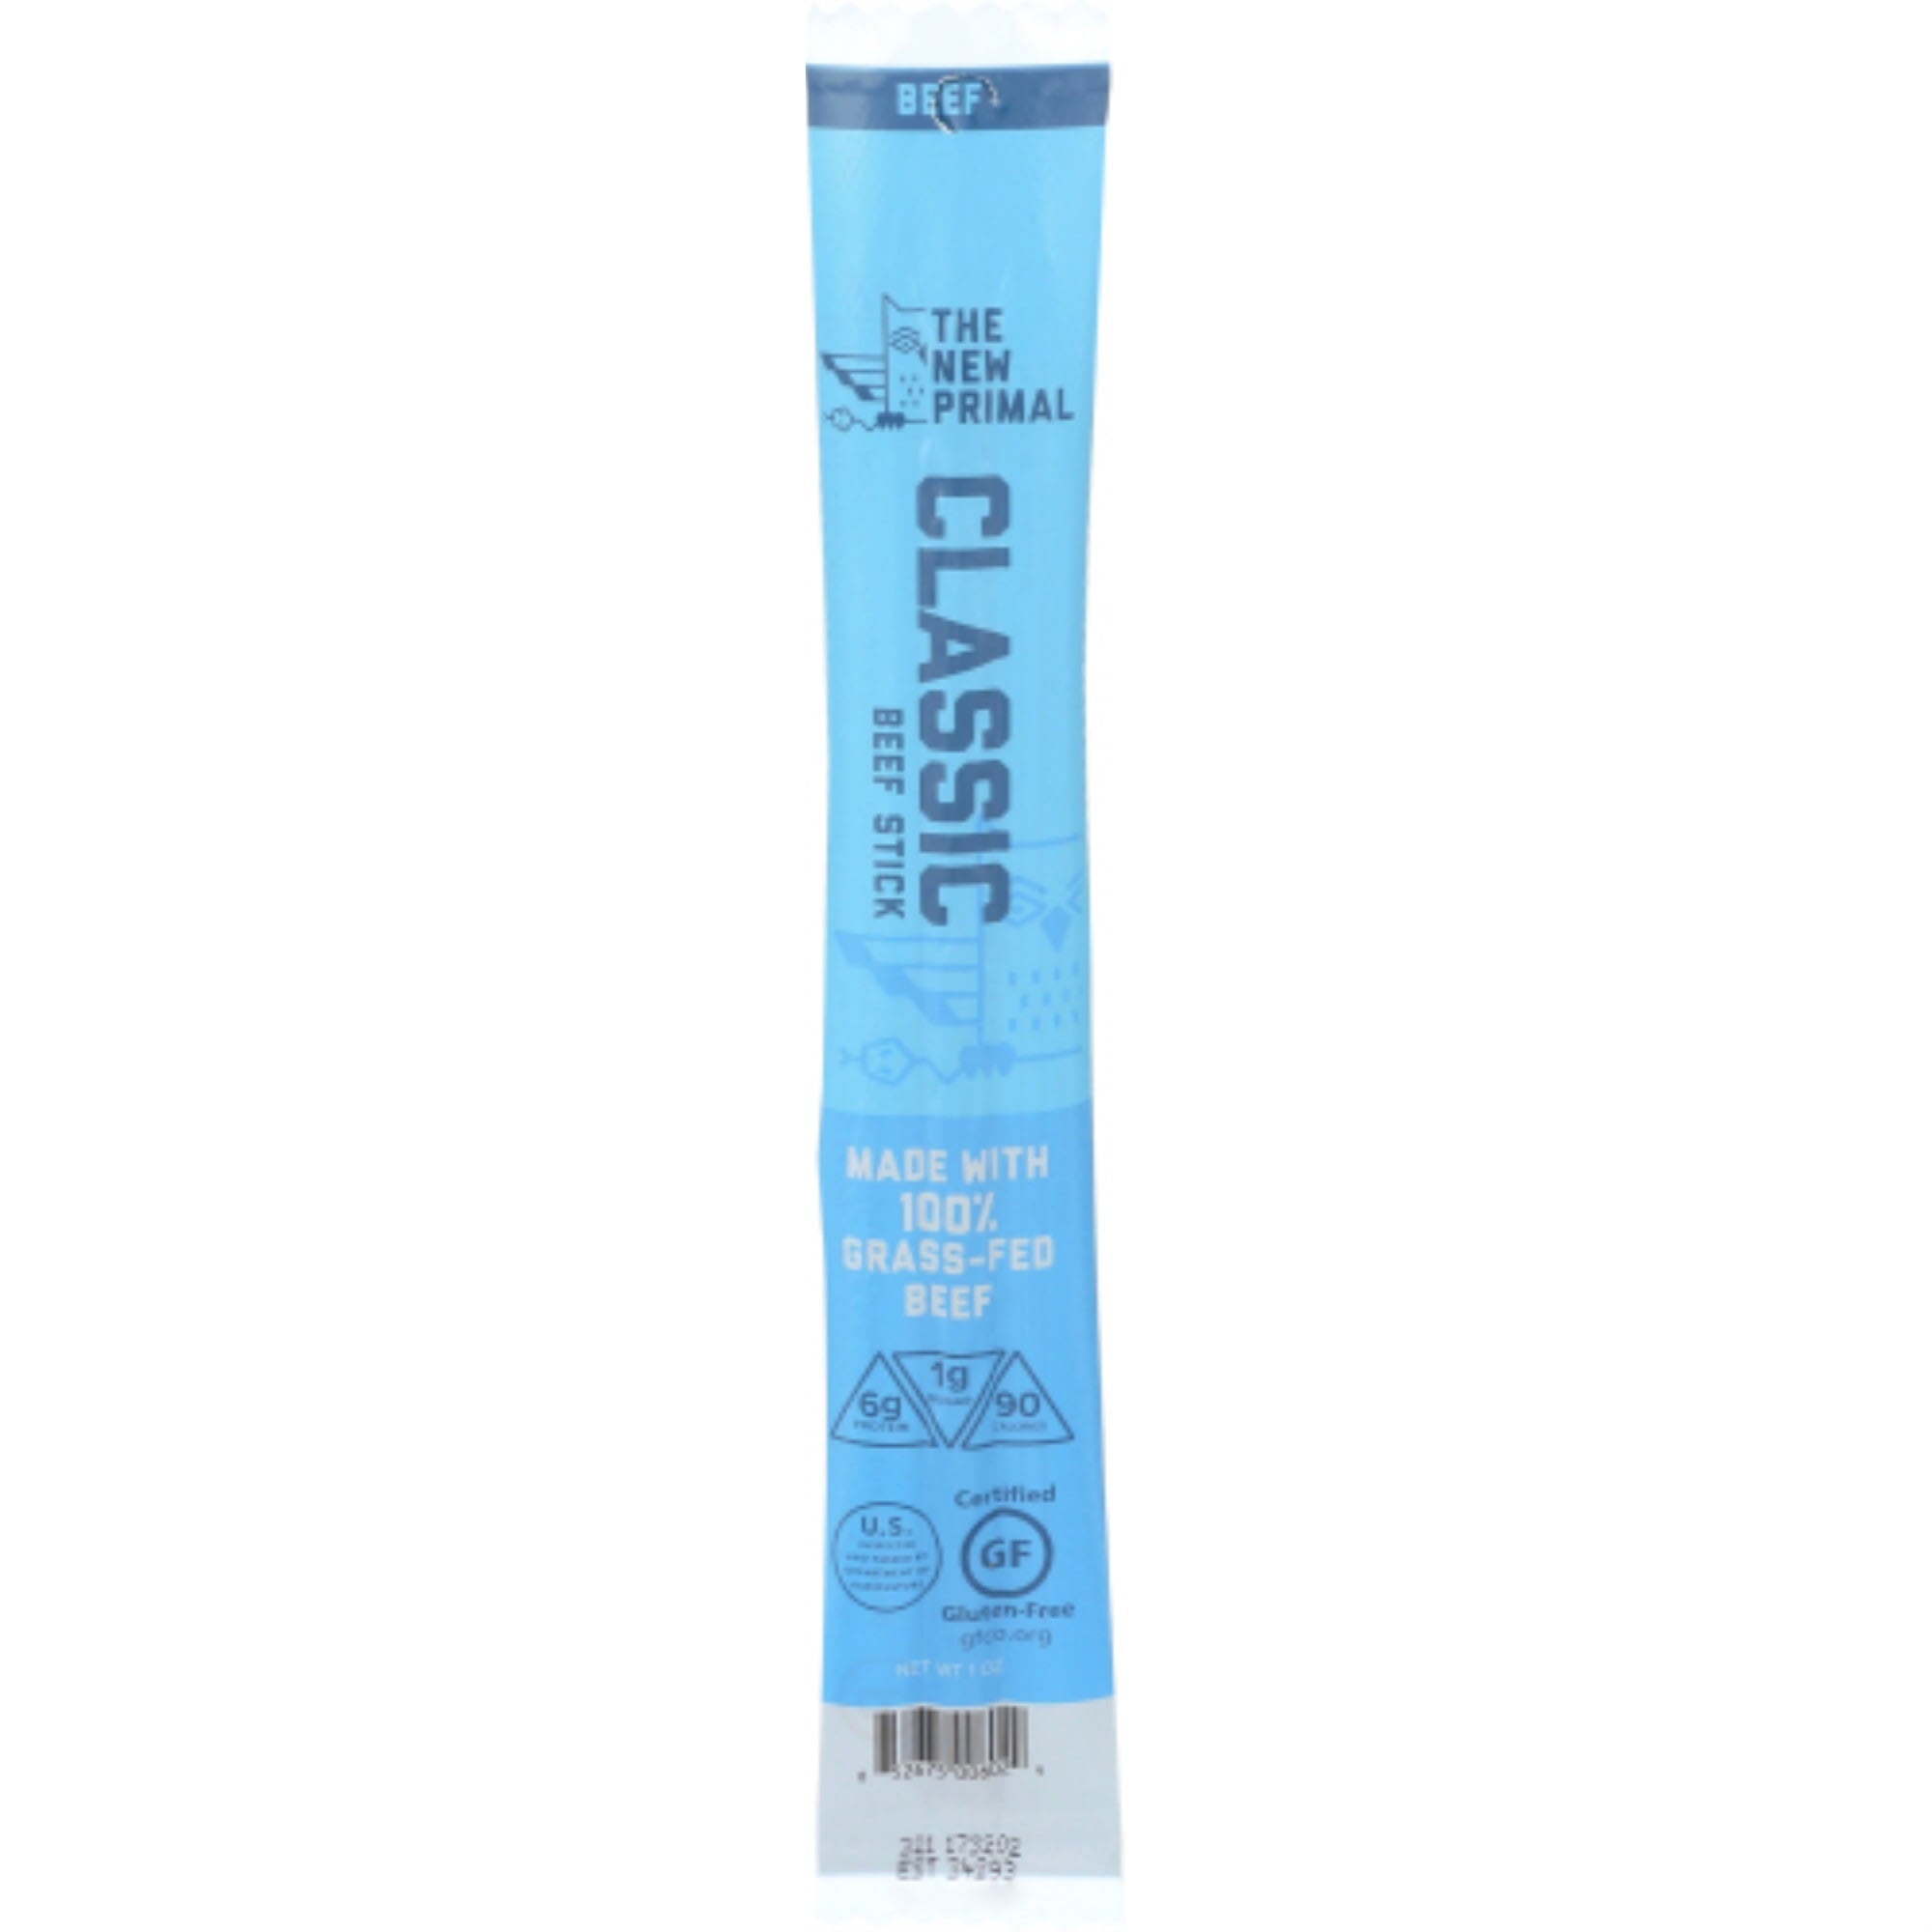 The New Primal Grass-Fed Beef Stick Classic 1 oz